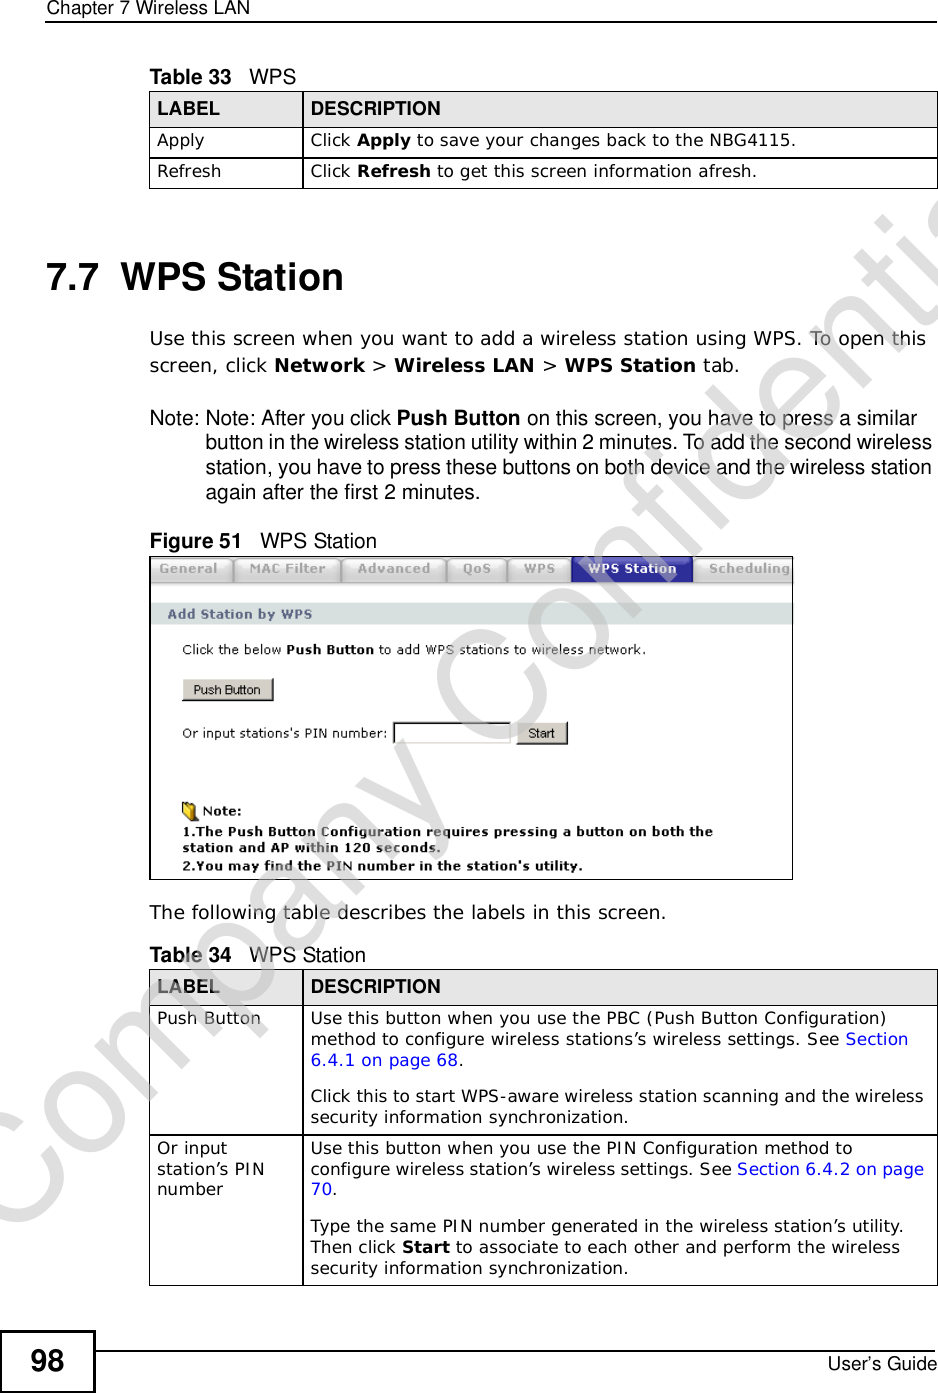 Chapter 7Wireless LANUser’s Guide987.7  WPS StationUse this screen when you want to add a wireless station using WPS. To open this screen, click Network &gt; Wireless LAN &gt; WPS Station tab.Note: Note: After you click Push Button on this screen, you have to press a similar button in the wireless station utility within 2 minutes. To add the second wireless station, you have to press these buttons on both device and the wireless station again after the first 2 minutes.Figure 51   WPS StationThe following table describes the labels in this screen.Apply Click Apply to save your changes back to the NBG4115.Refresh Click Refresh to get this screen information afresh.Table 33   WPSLABEL DESCRIPTIONTable 34   WPS StationLABEL DESCRIPTIONPush Button Use this button when you use the PBC (Push Button Configuration) method to configure wireless stations’s wireless settings. See Section 6.4.1 on page 68.Click this to start WPS-aware wireless station scanning and the wireless security information synchronization. Or input station’s PIN numberUse this button when you use the PIN Configuration method to configure wireless station’s wireless settings. See Section 6.4.2 on page 70.Type the same PIN number generated in the wireless station’s utility. Then click Start to associate to each other and perform the wireless security information synchronization. Company Confidential